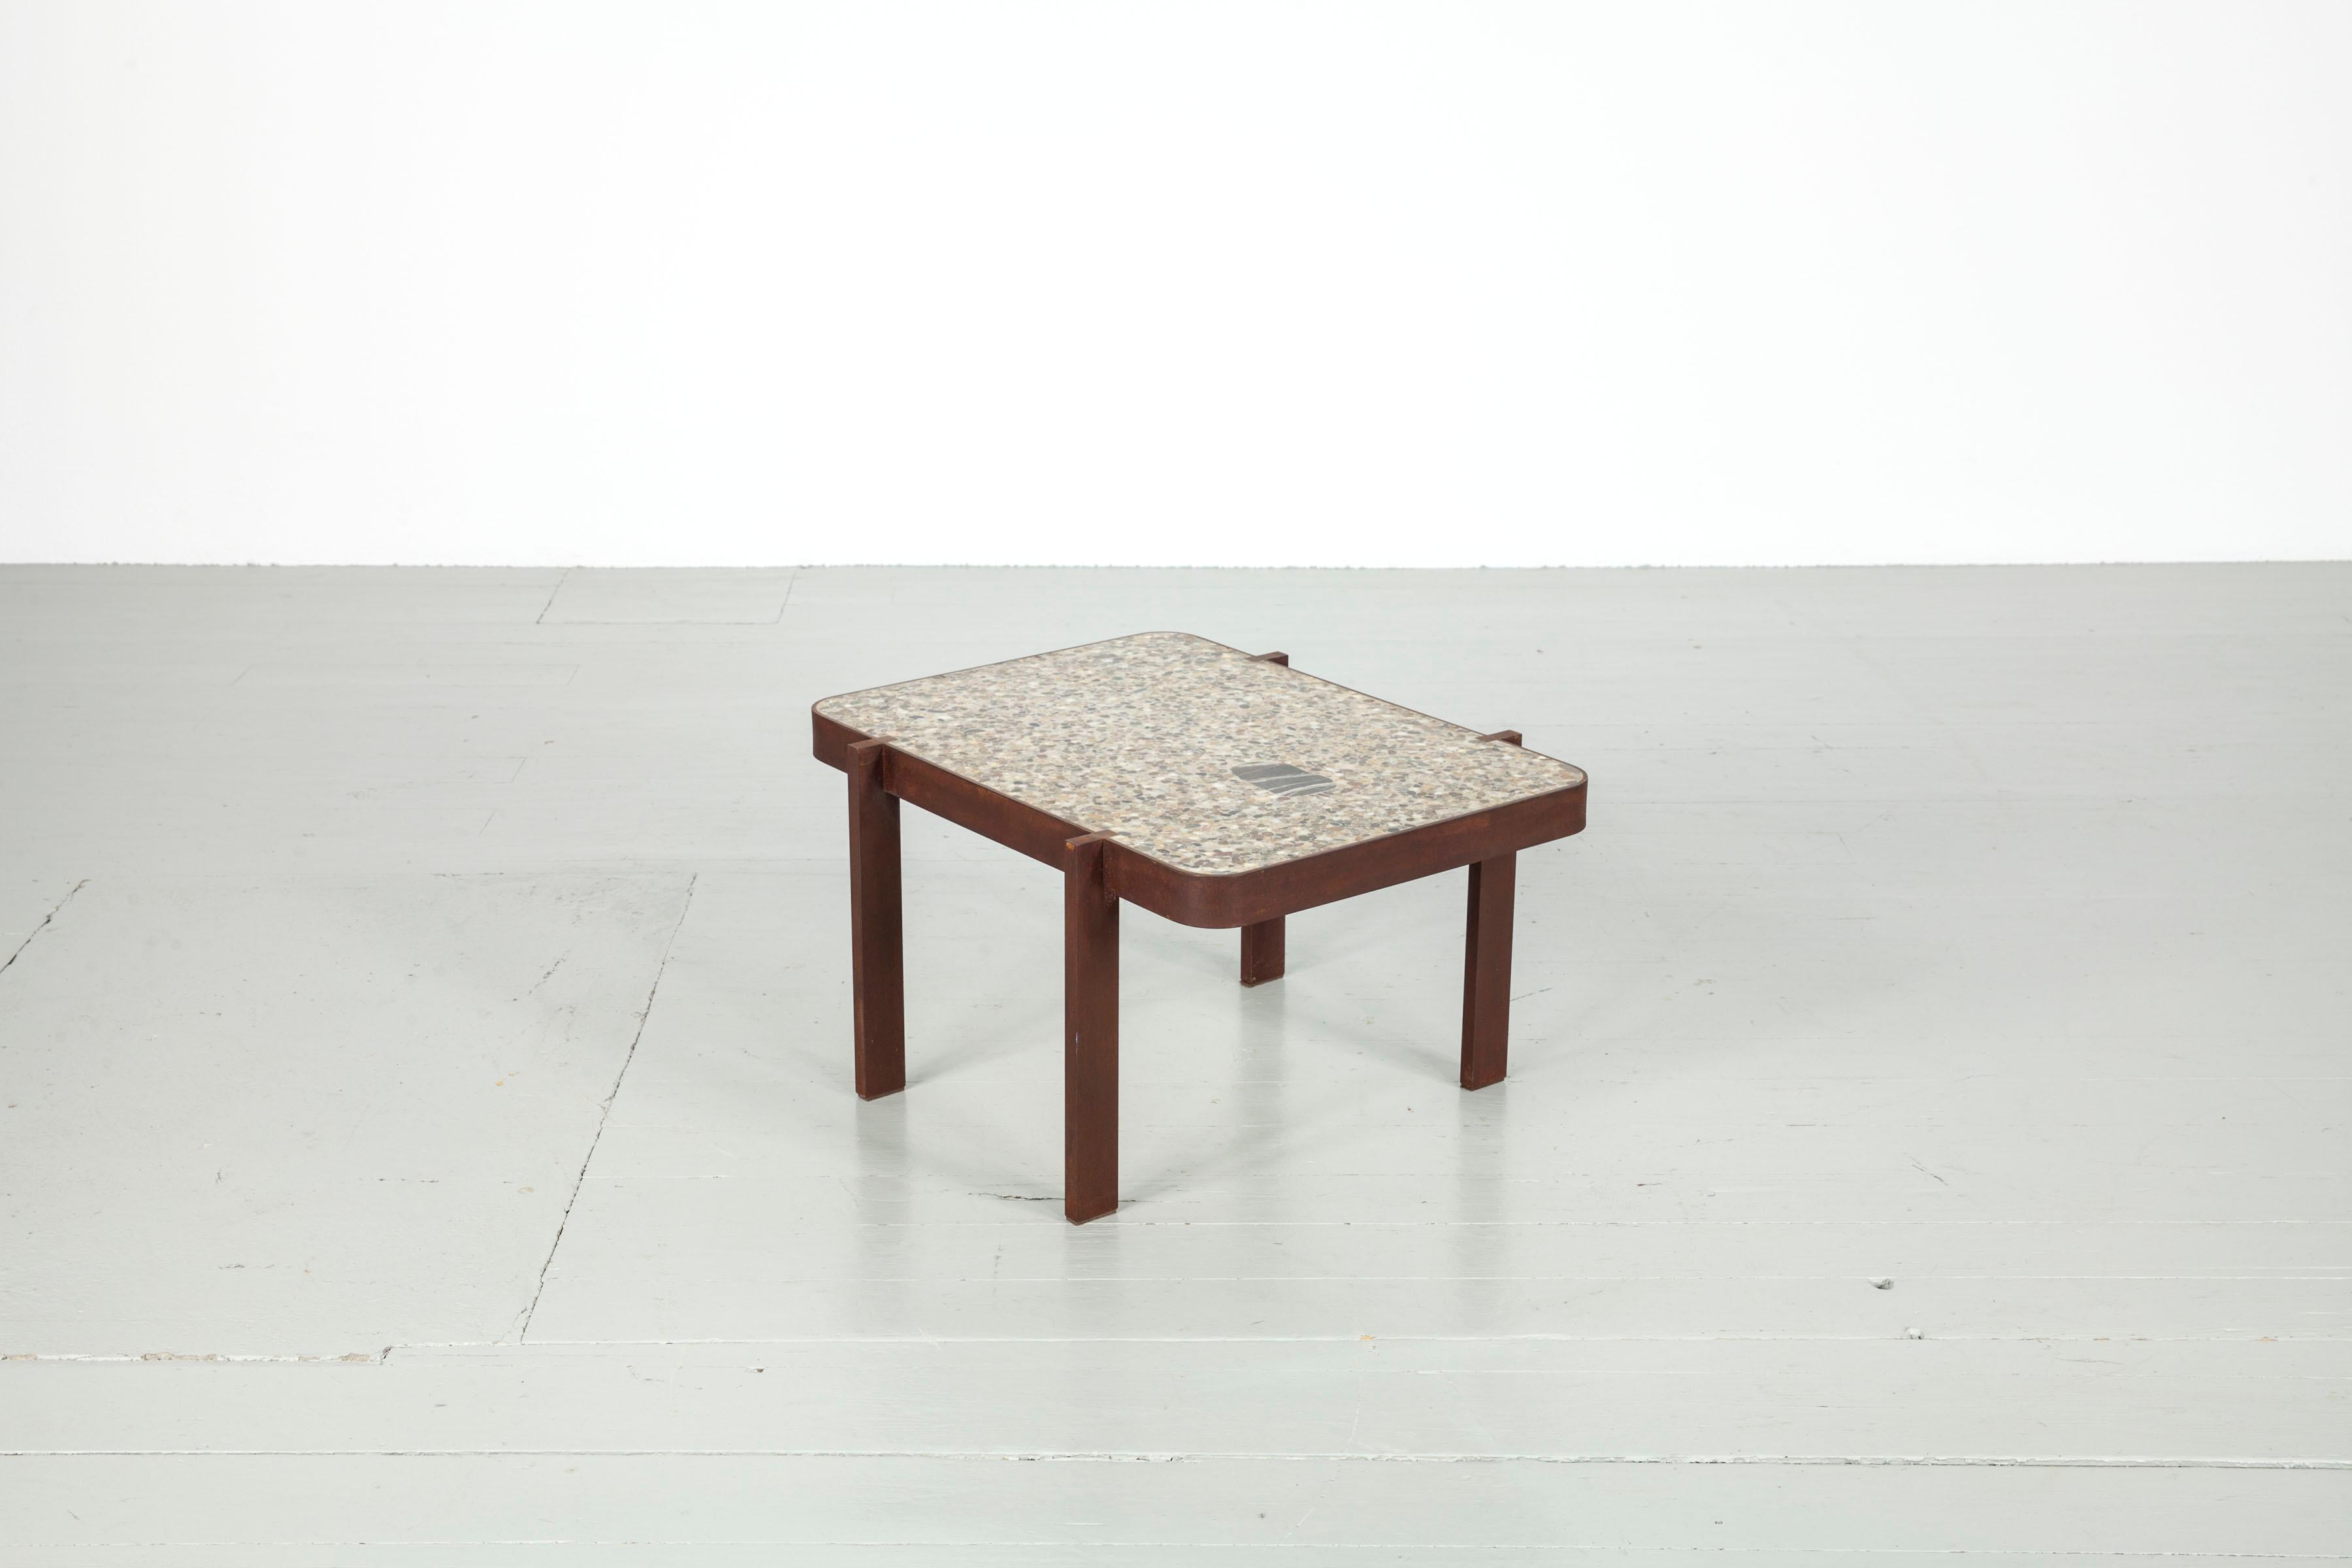 Felix Muhrhofer Contemporary Terrazzo Table with Corroded Steel Construction 10